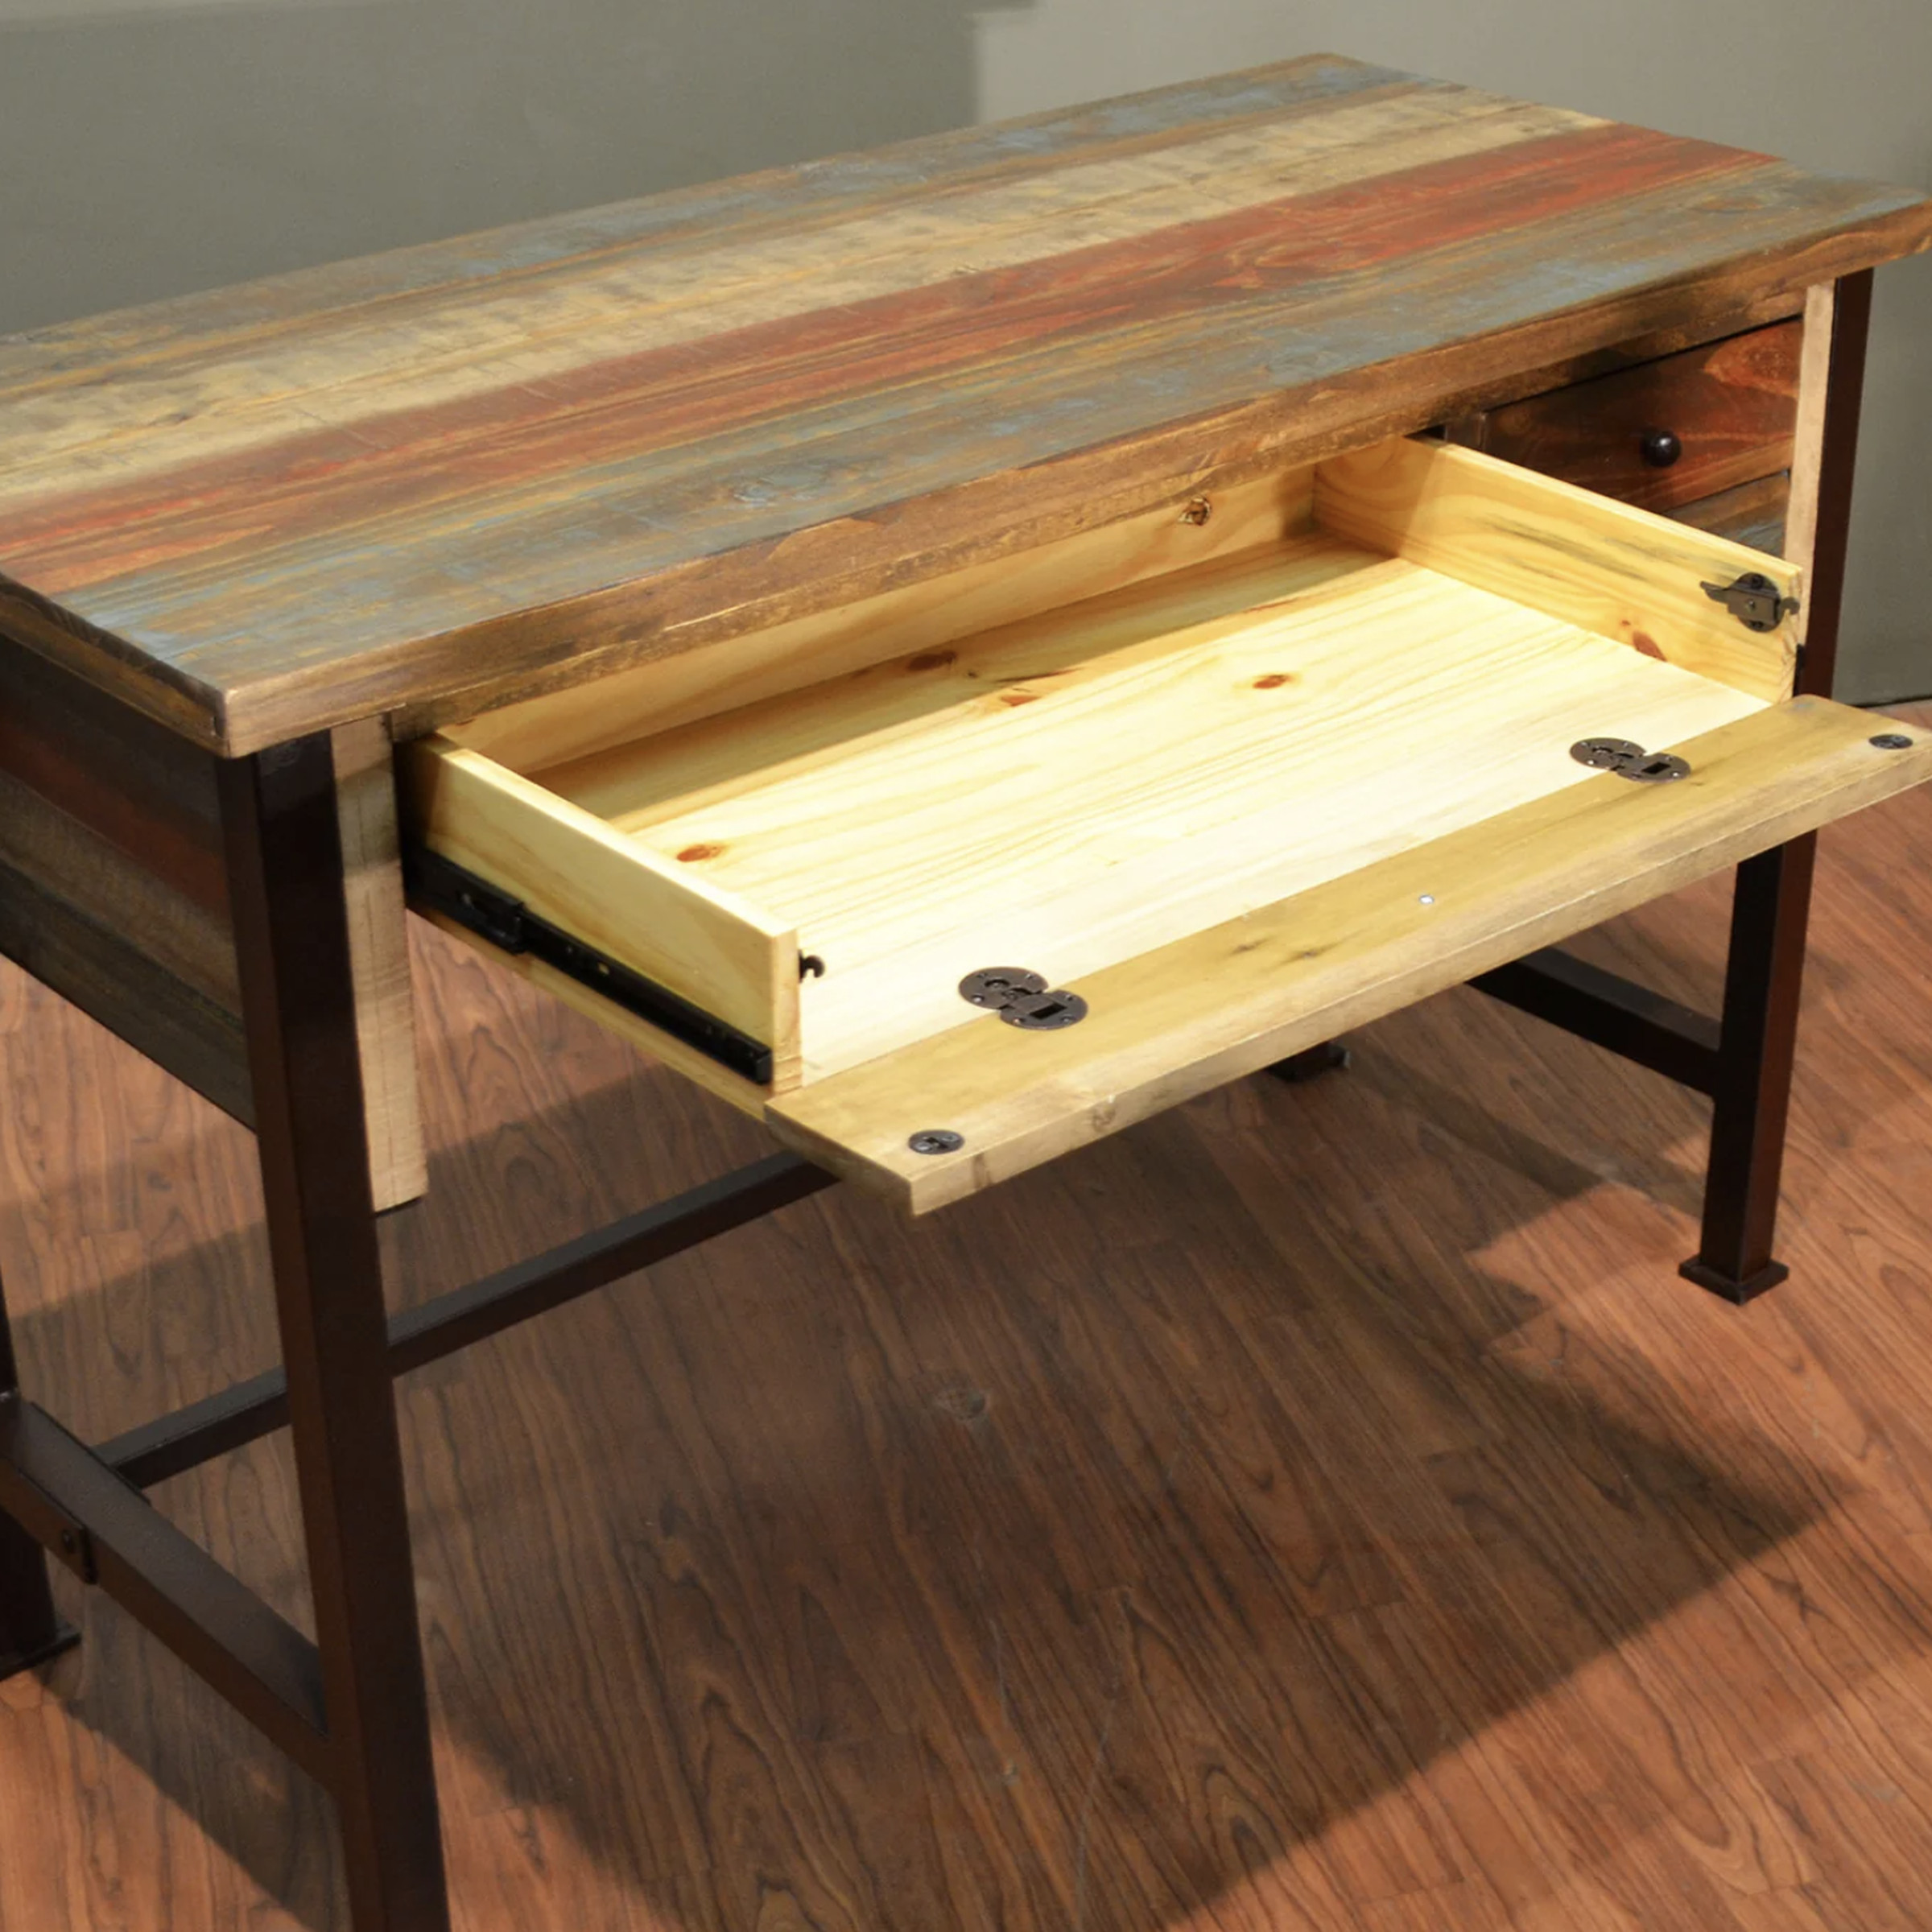 Wooden desk with open drawer.